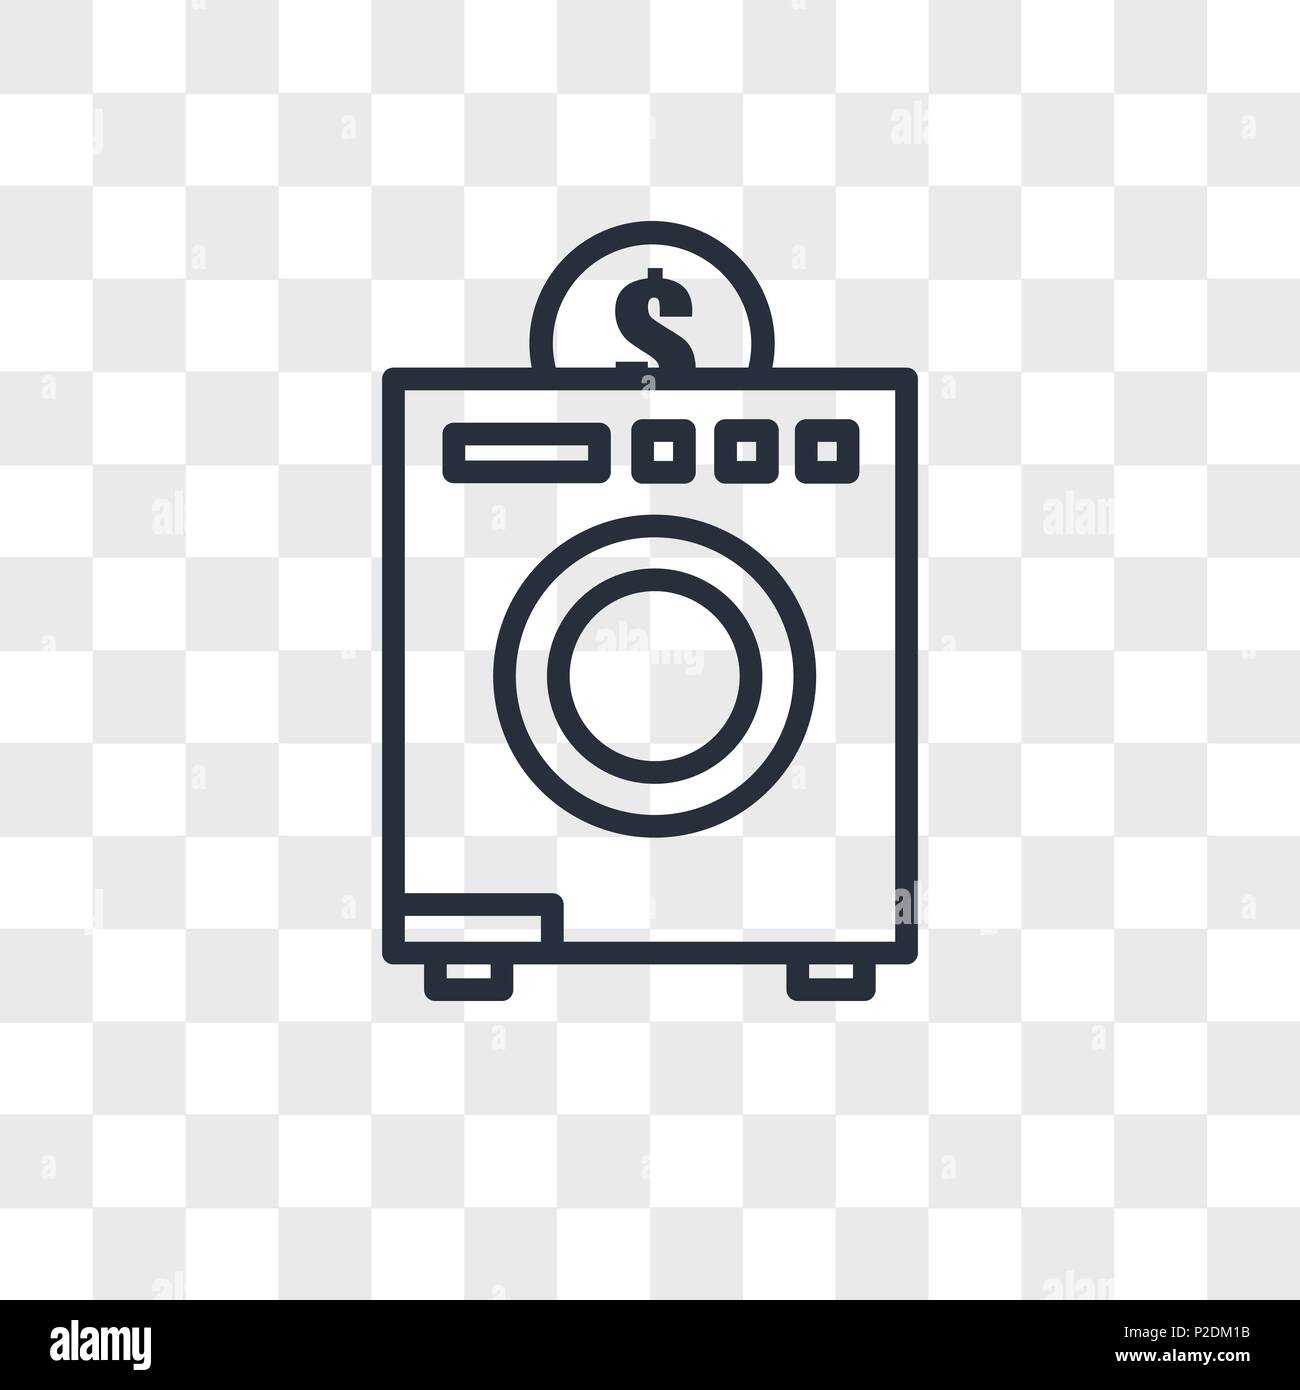 coin laundry vector icon isolated on transparent background, coin laundry logo concept Stock Vector